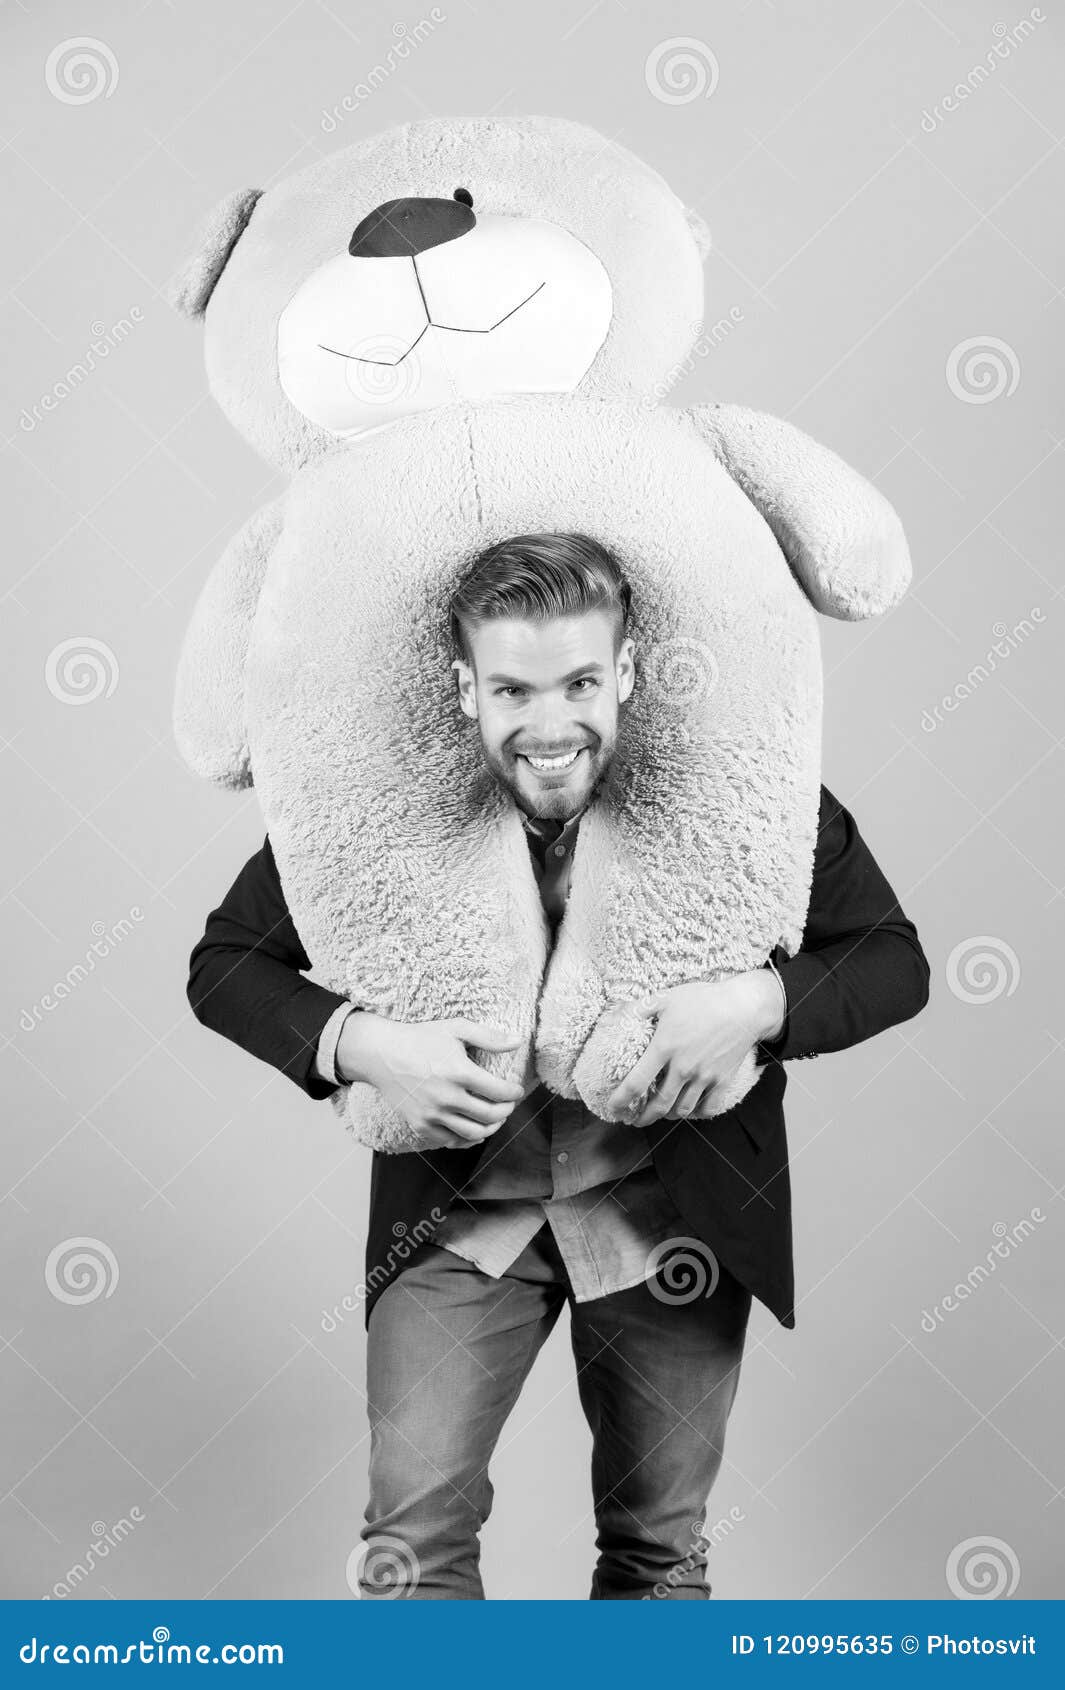 macho smiling with big animal toy, present